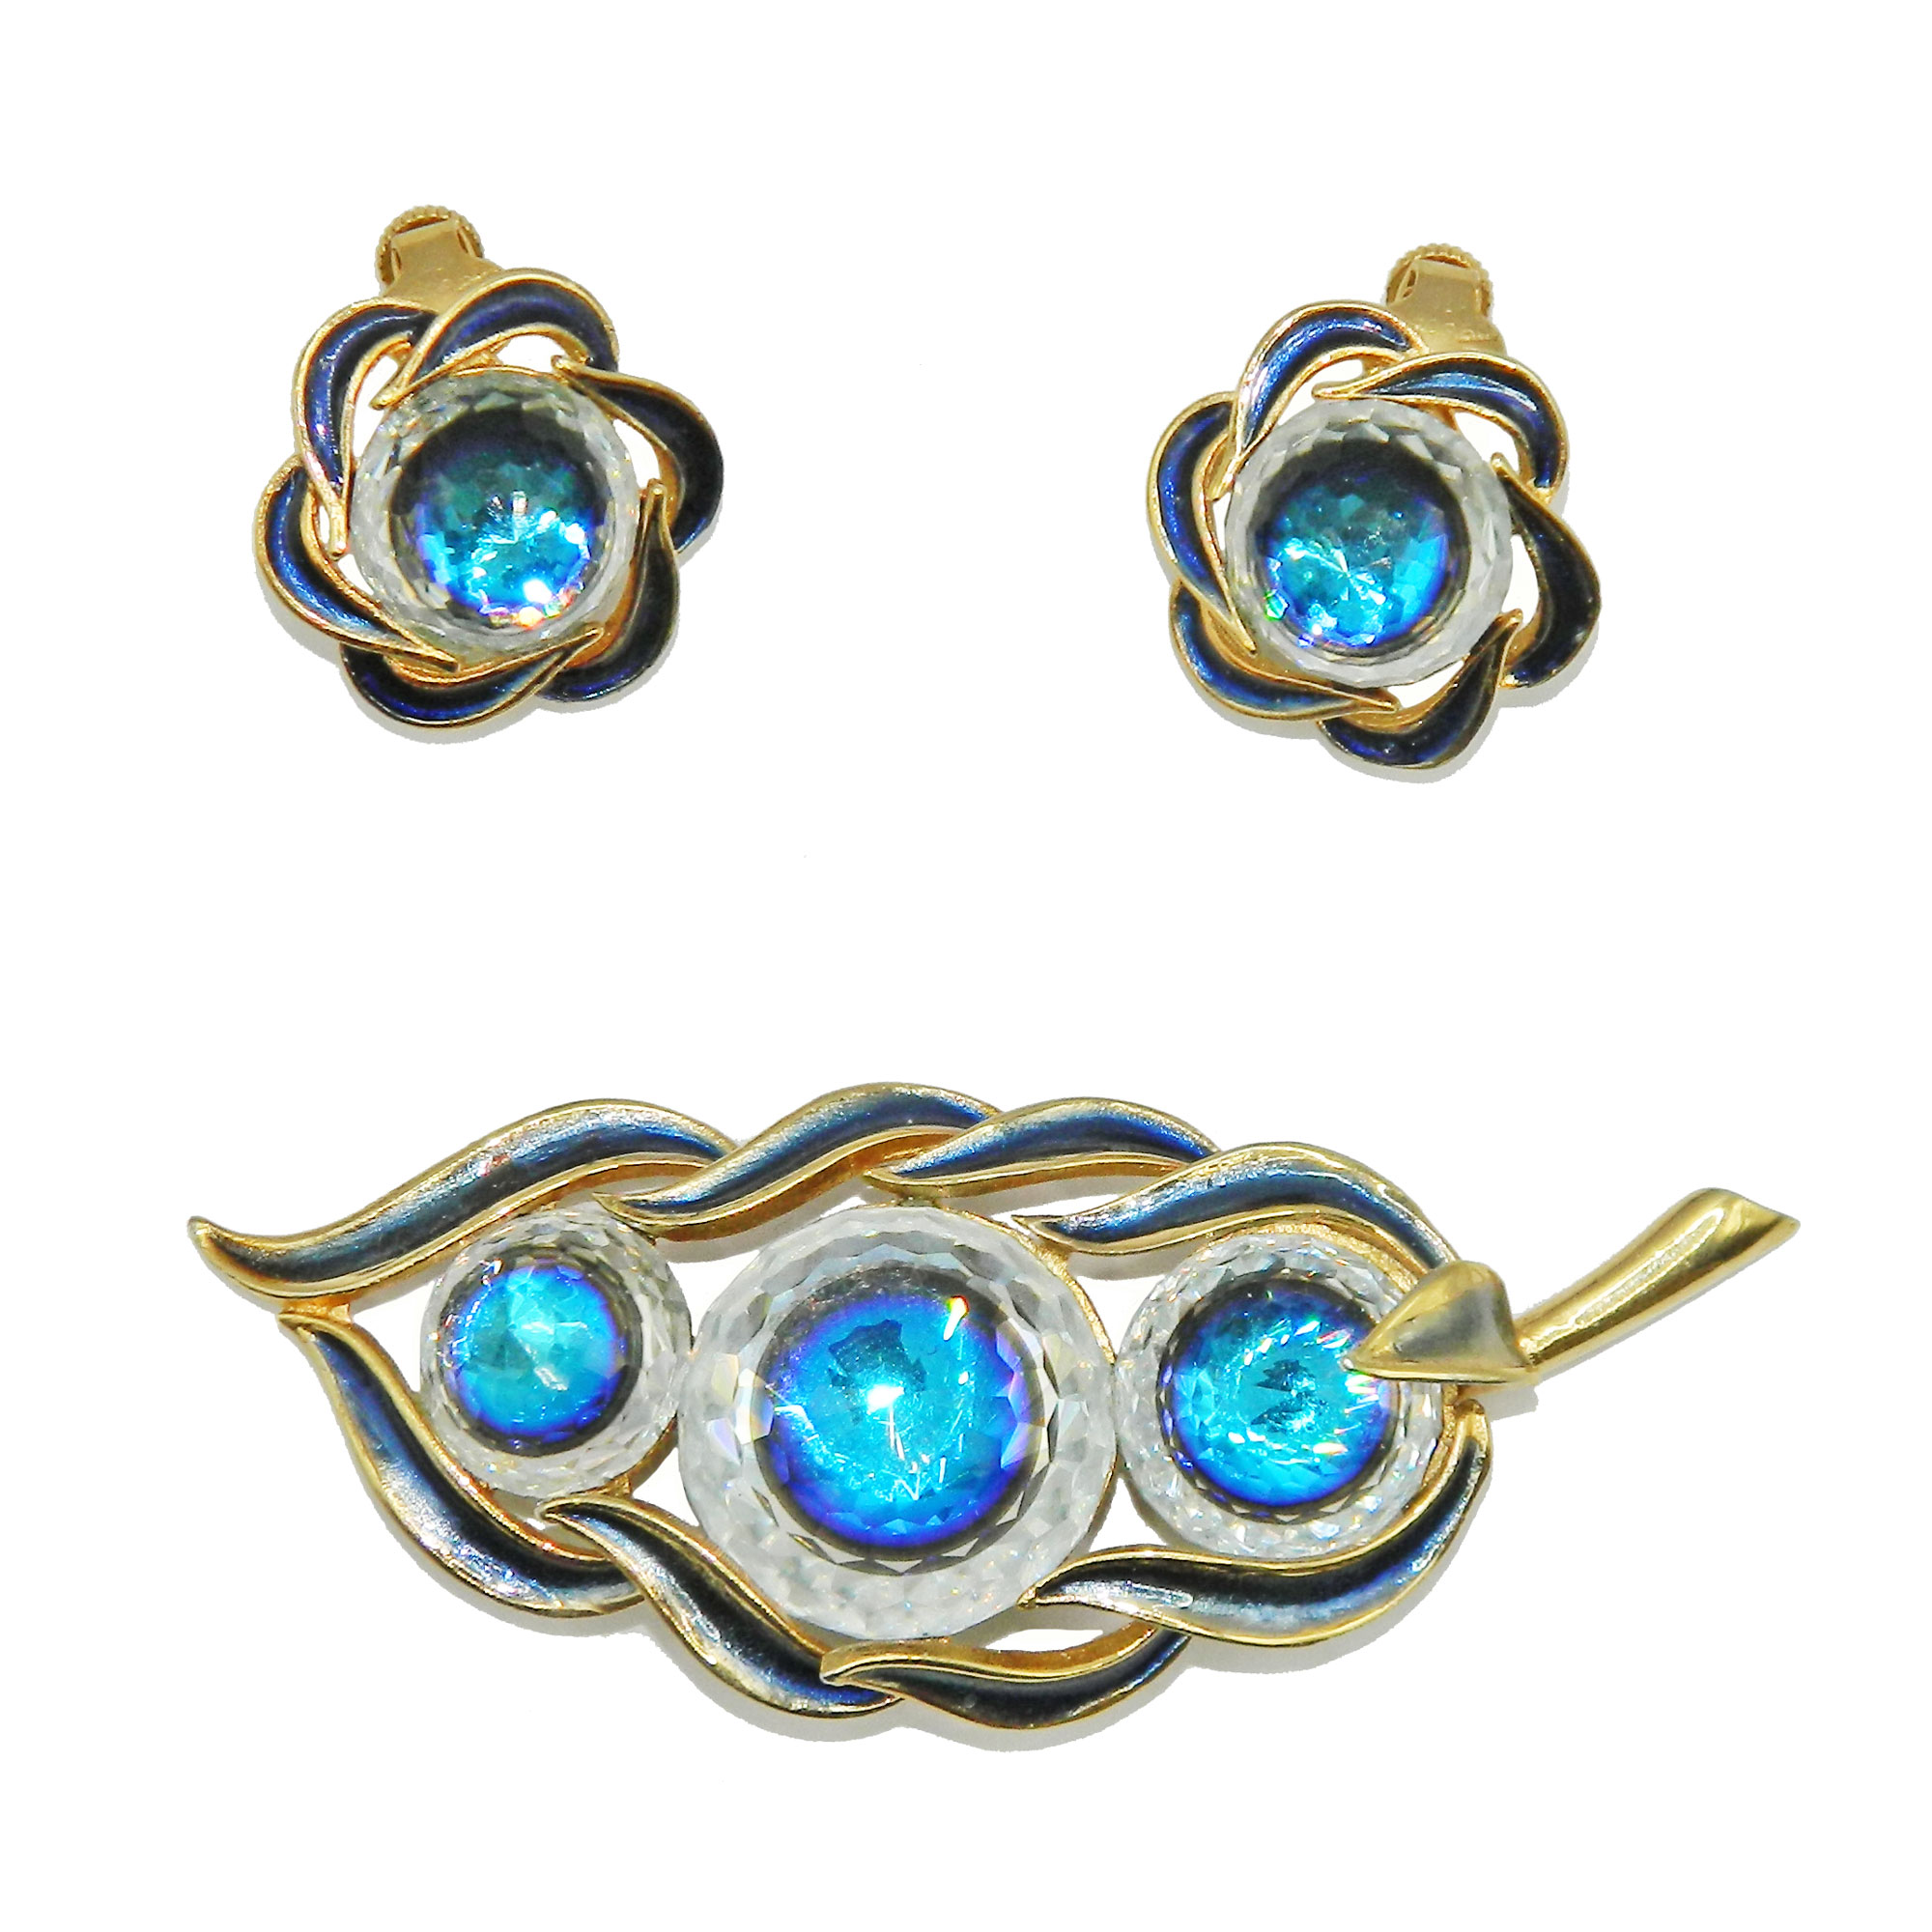 1950s Vendome brooch and earring set